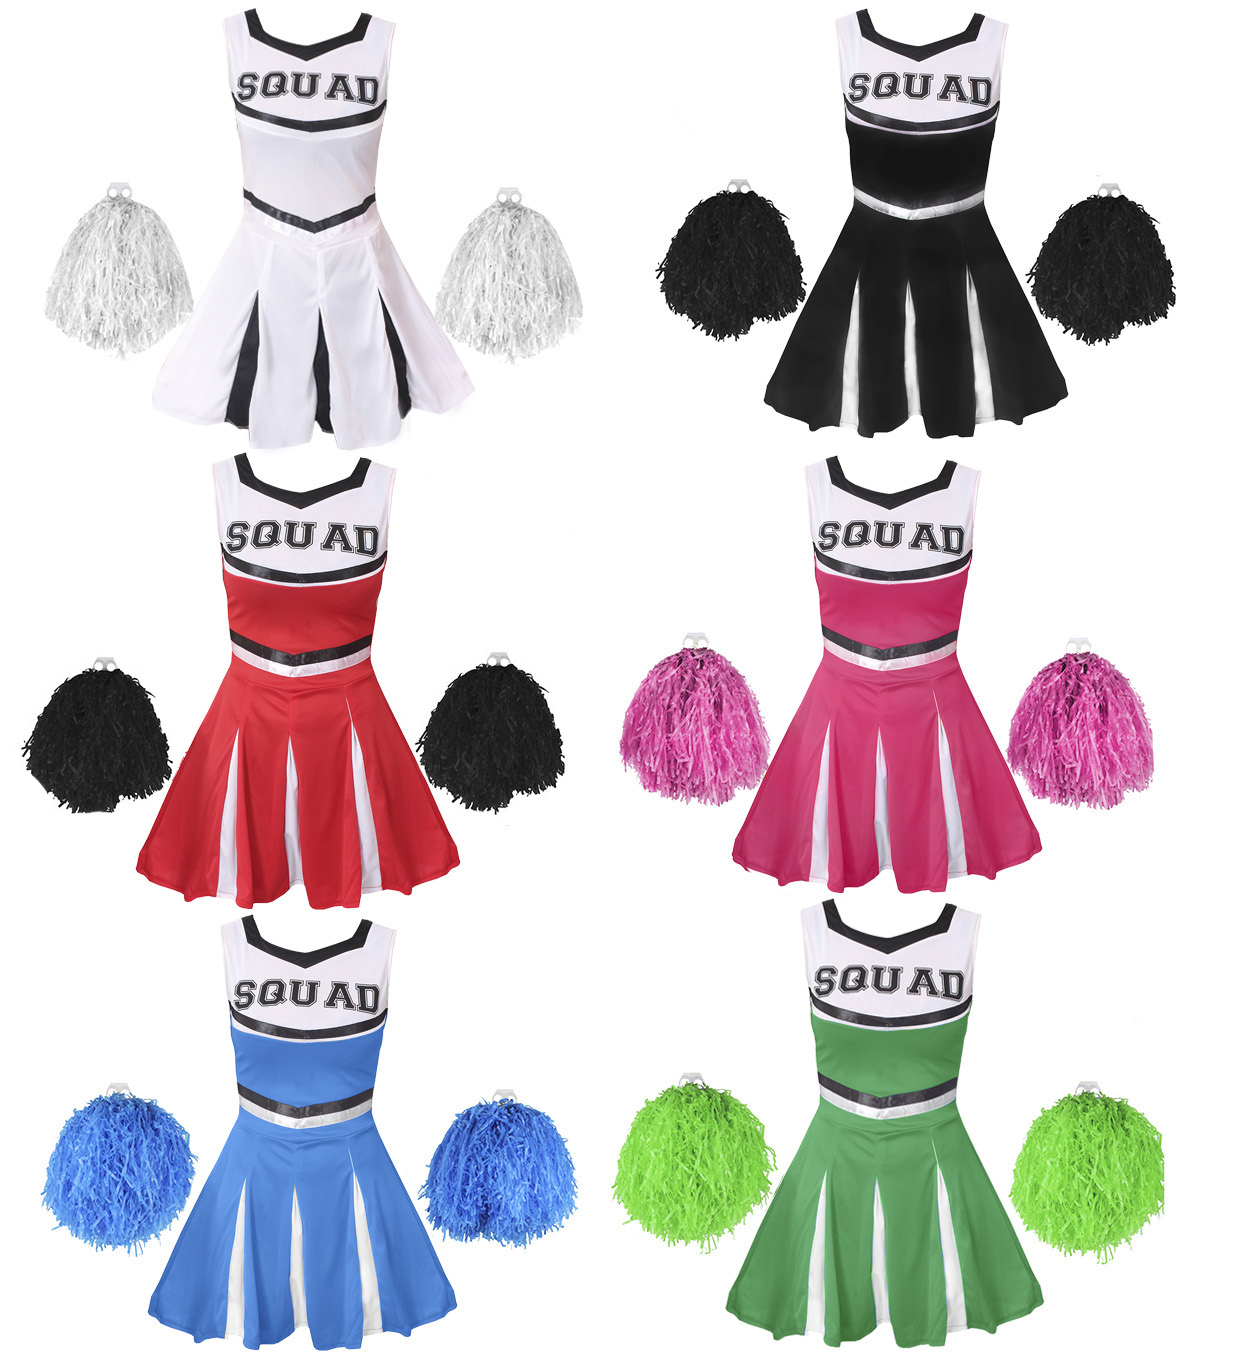 Details about CHEERLEADER FANCY DRESS COSTUME ADULTS CHEER UNIFORM OUTFIT  HIGH SCHOOL SPORT.